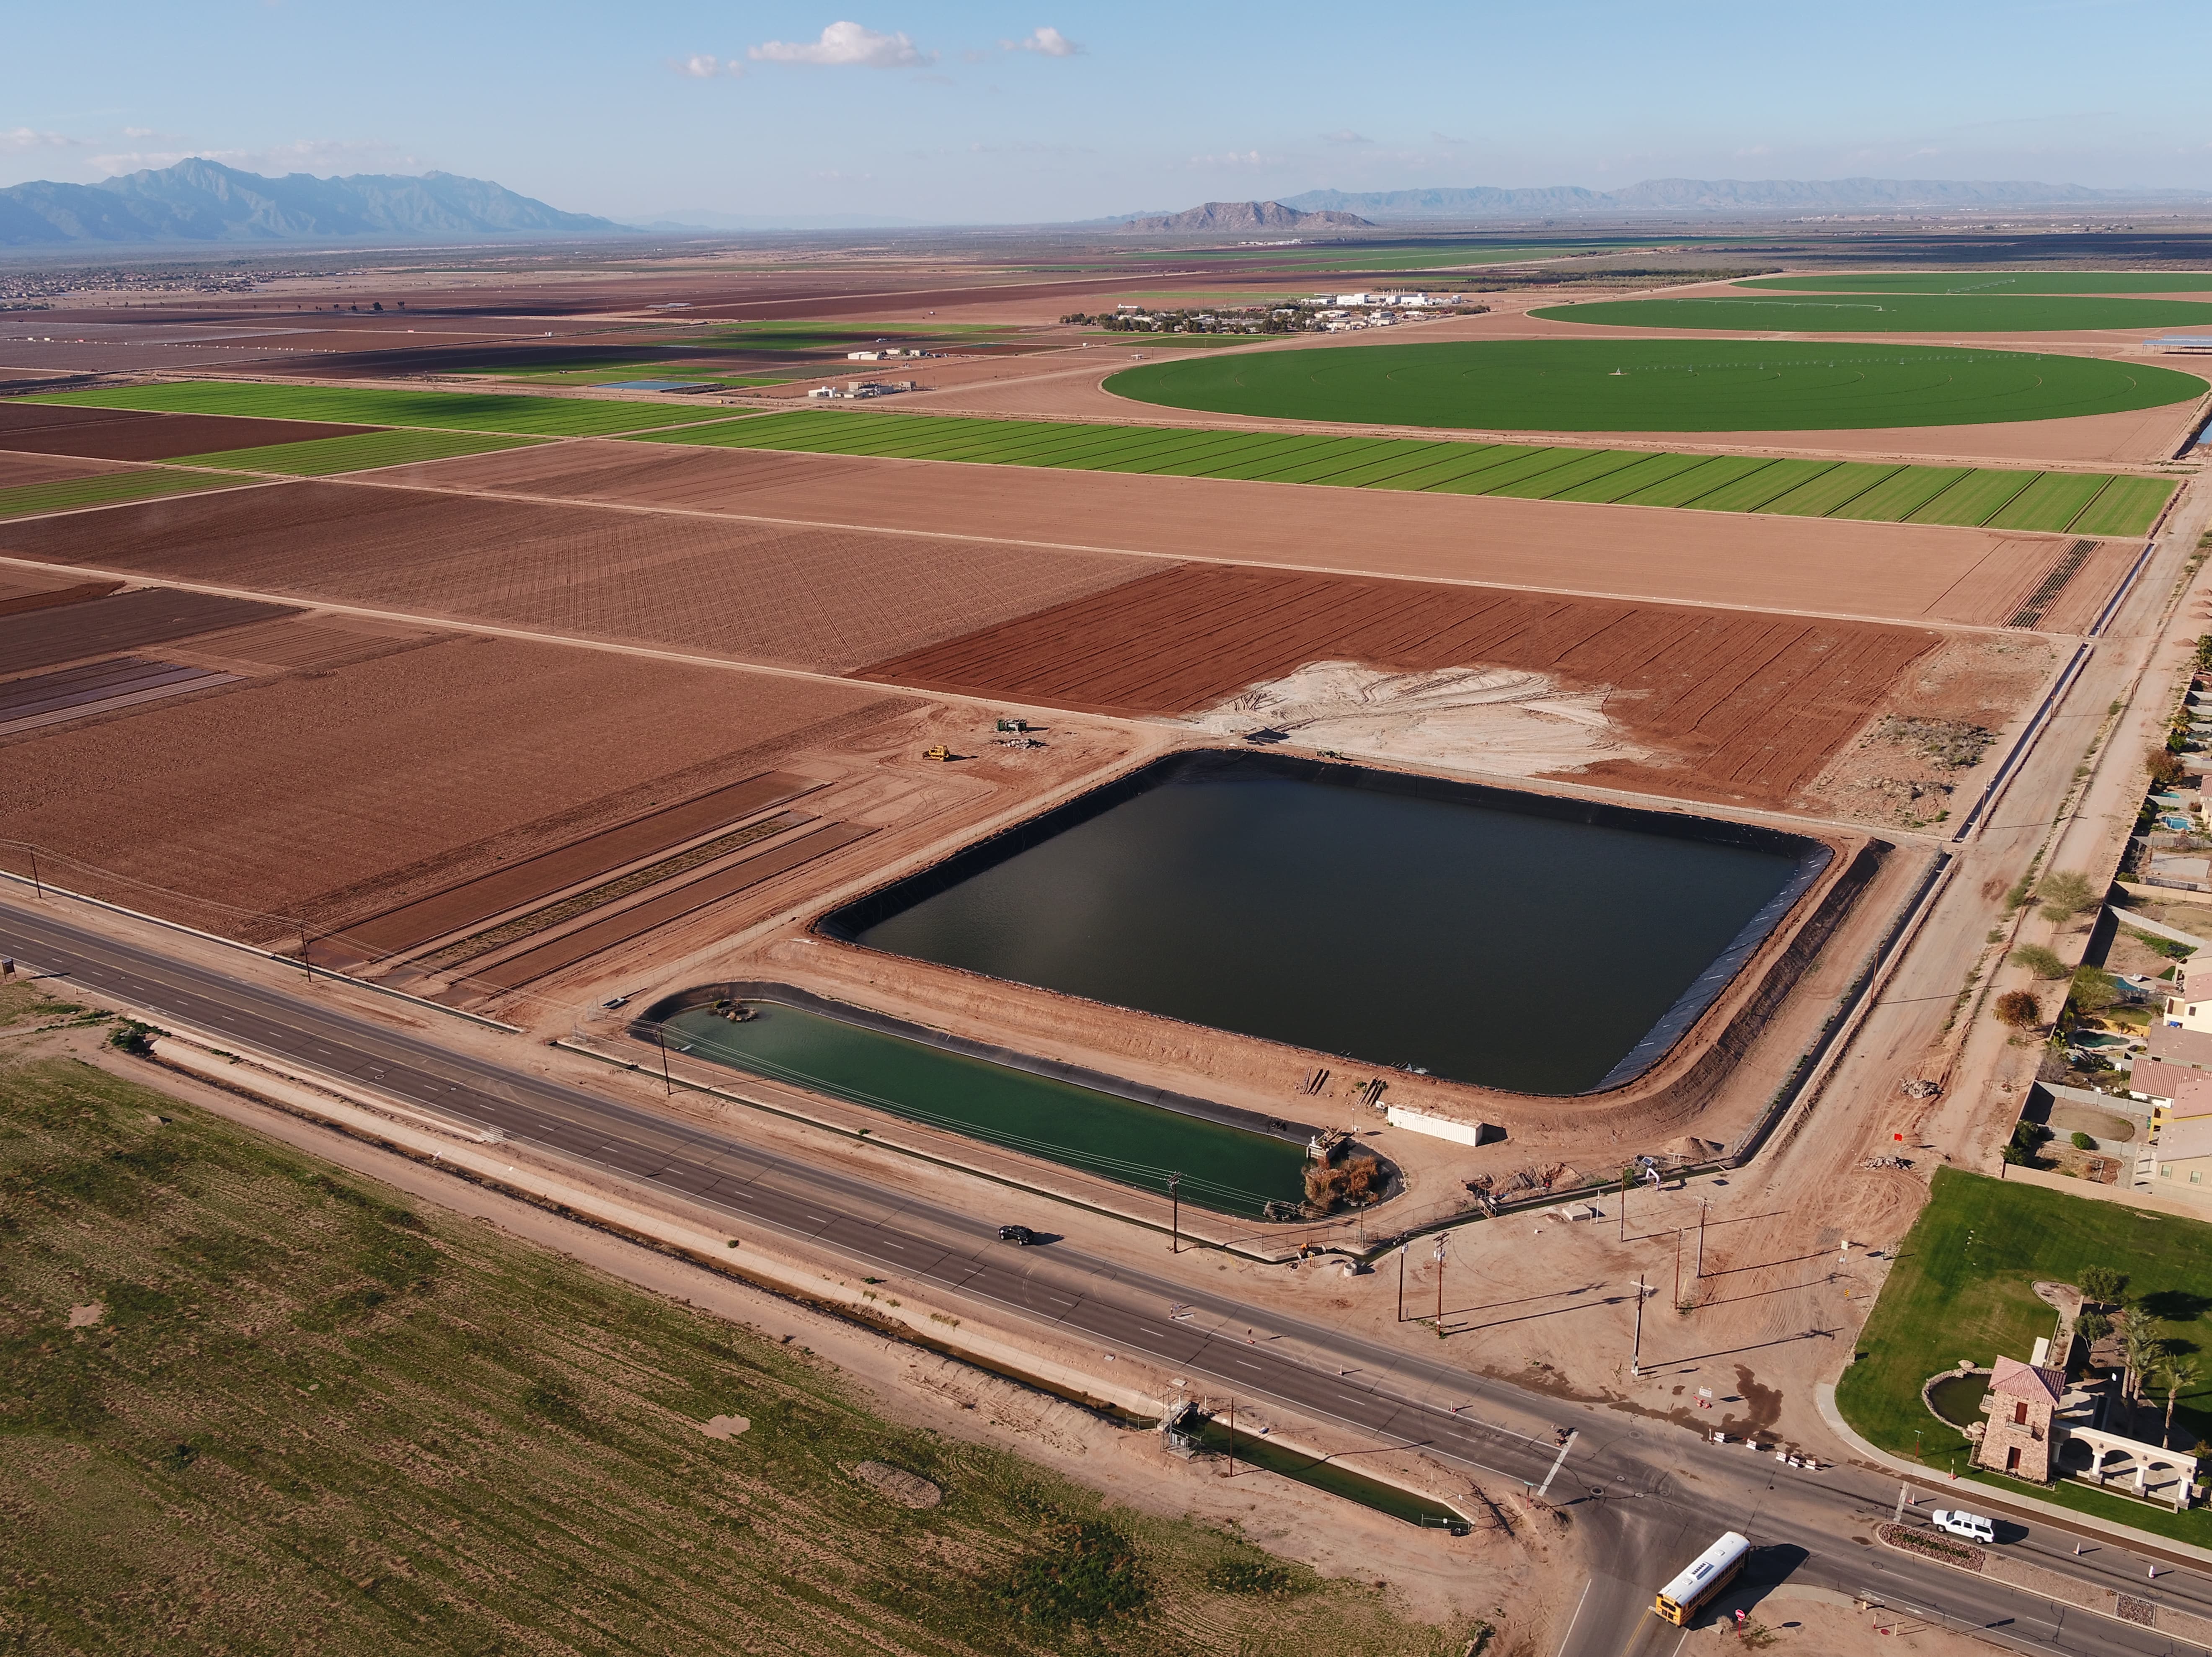 University of Arizona Agricultural Research Pond - EWL Aerial tech